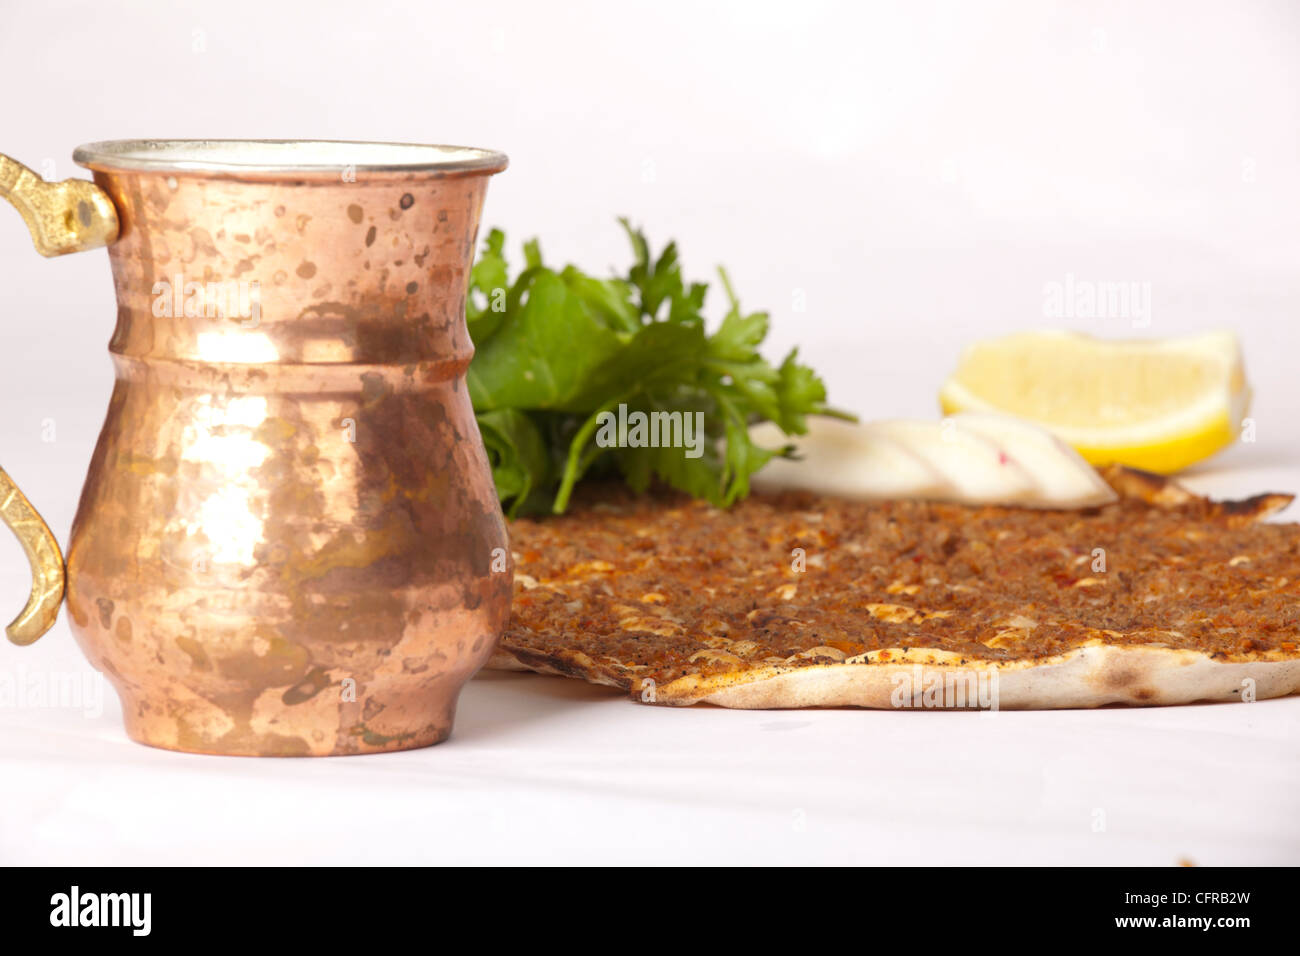 Delicious Turkish pizza lahmacun on isolated background Stock Photo